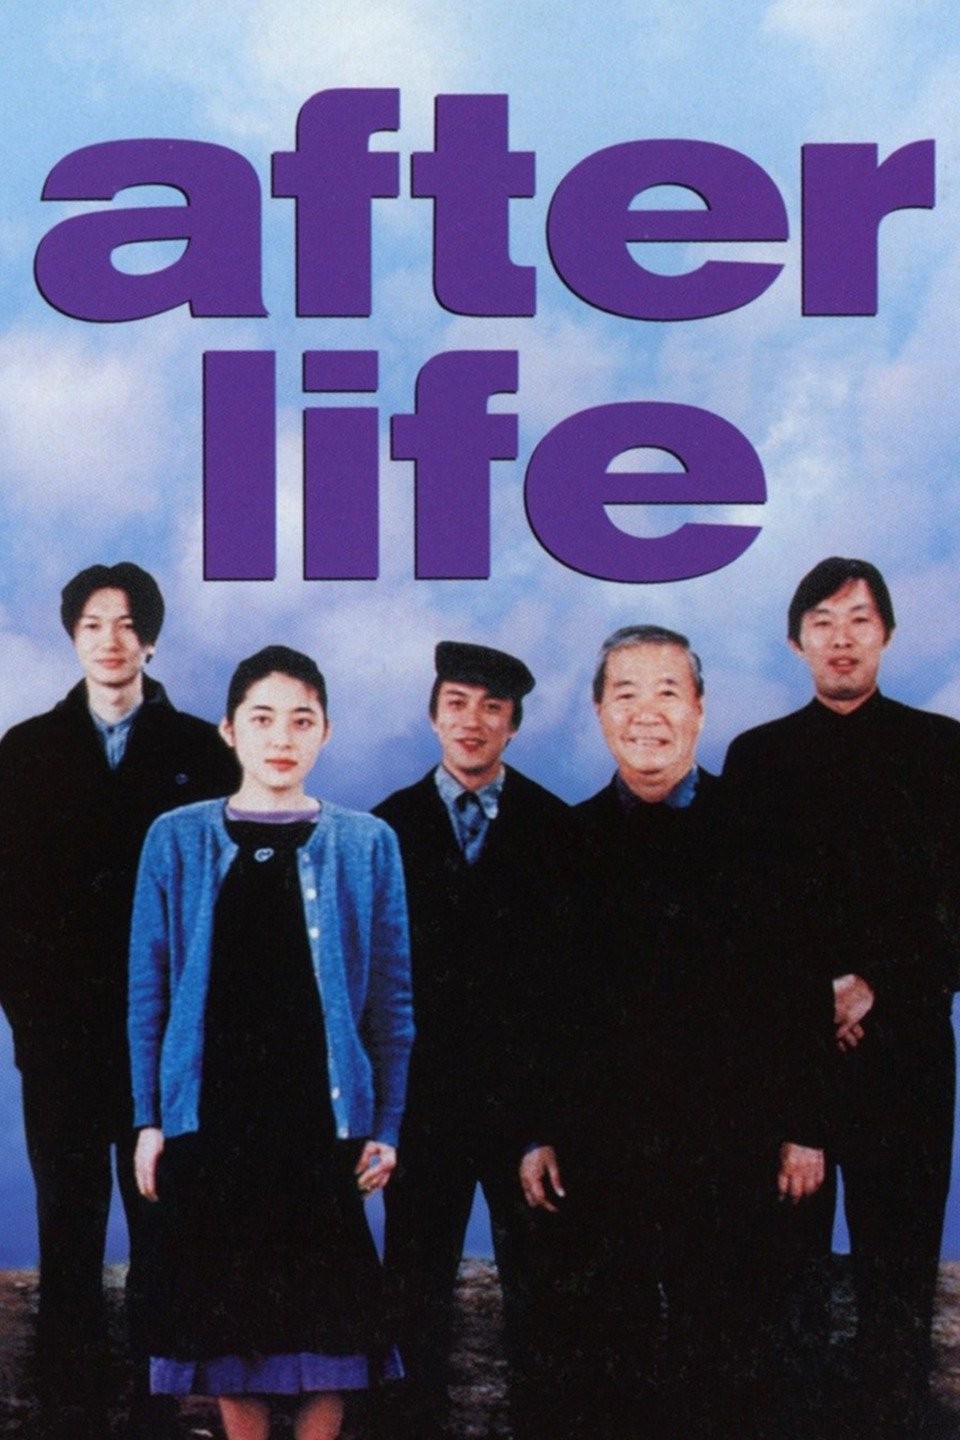 After.Life Movie Poster